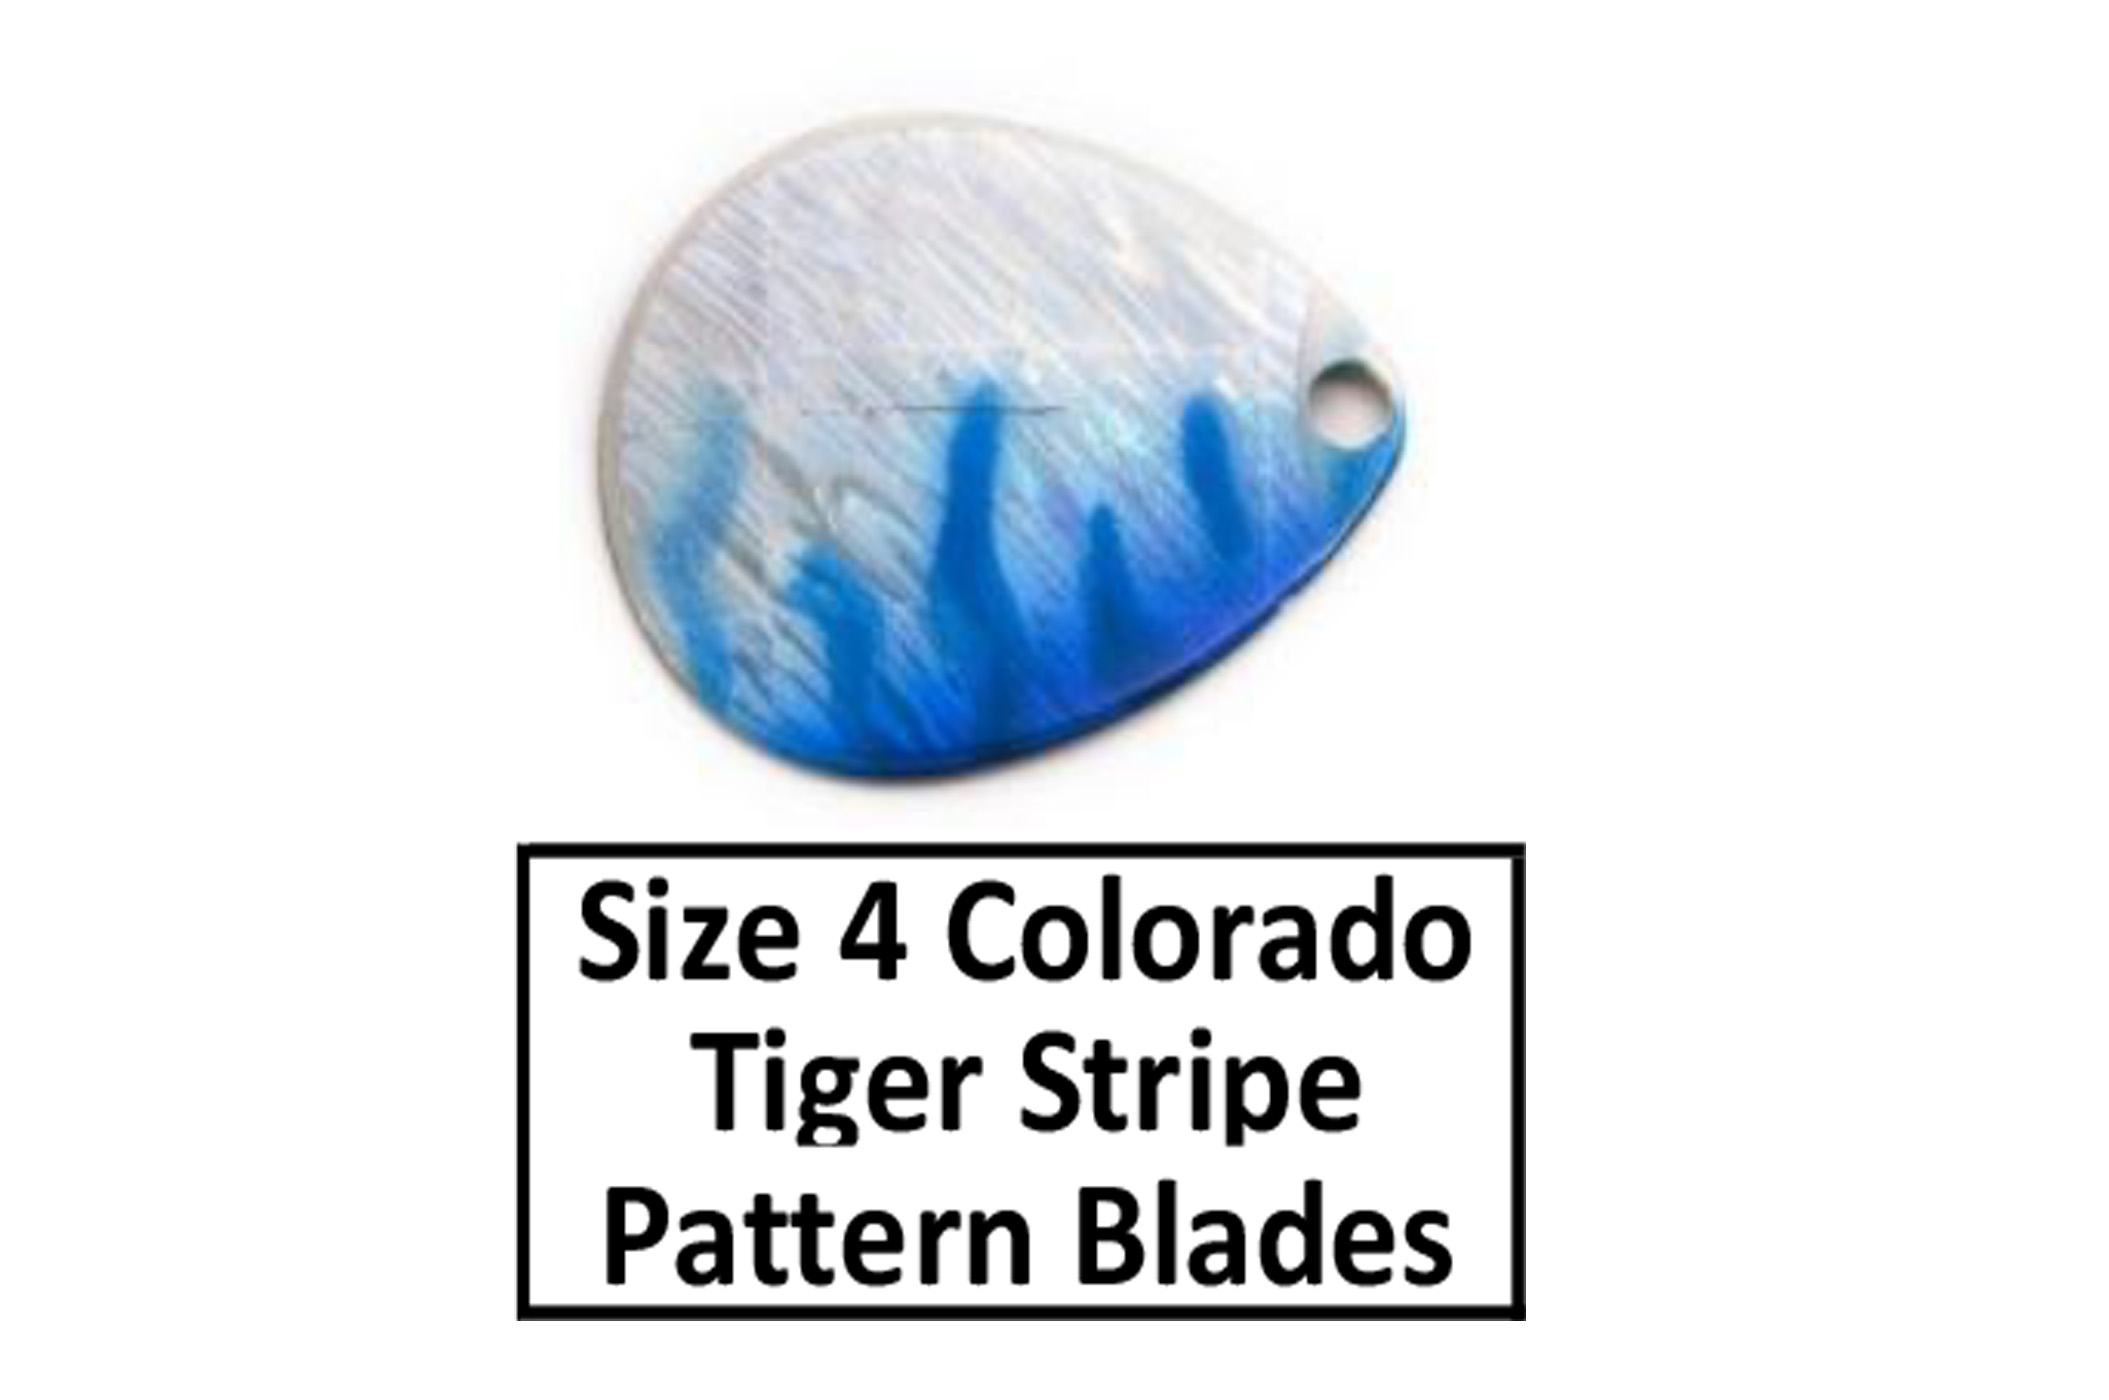 Size 4 Colorado Double Hole Custom Painted Spinner Blades - D&B Fishing